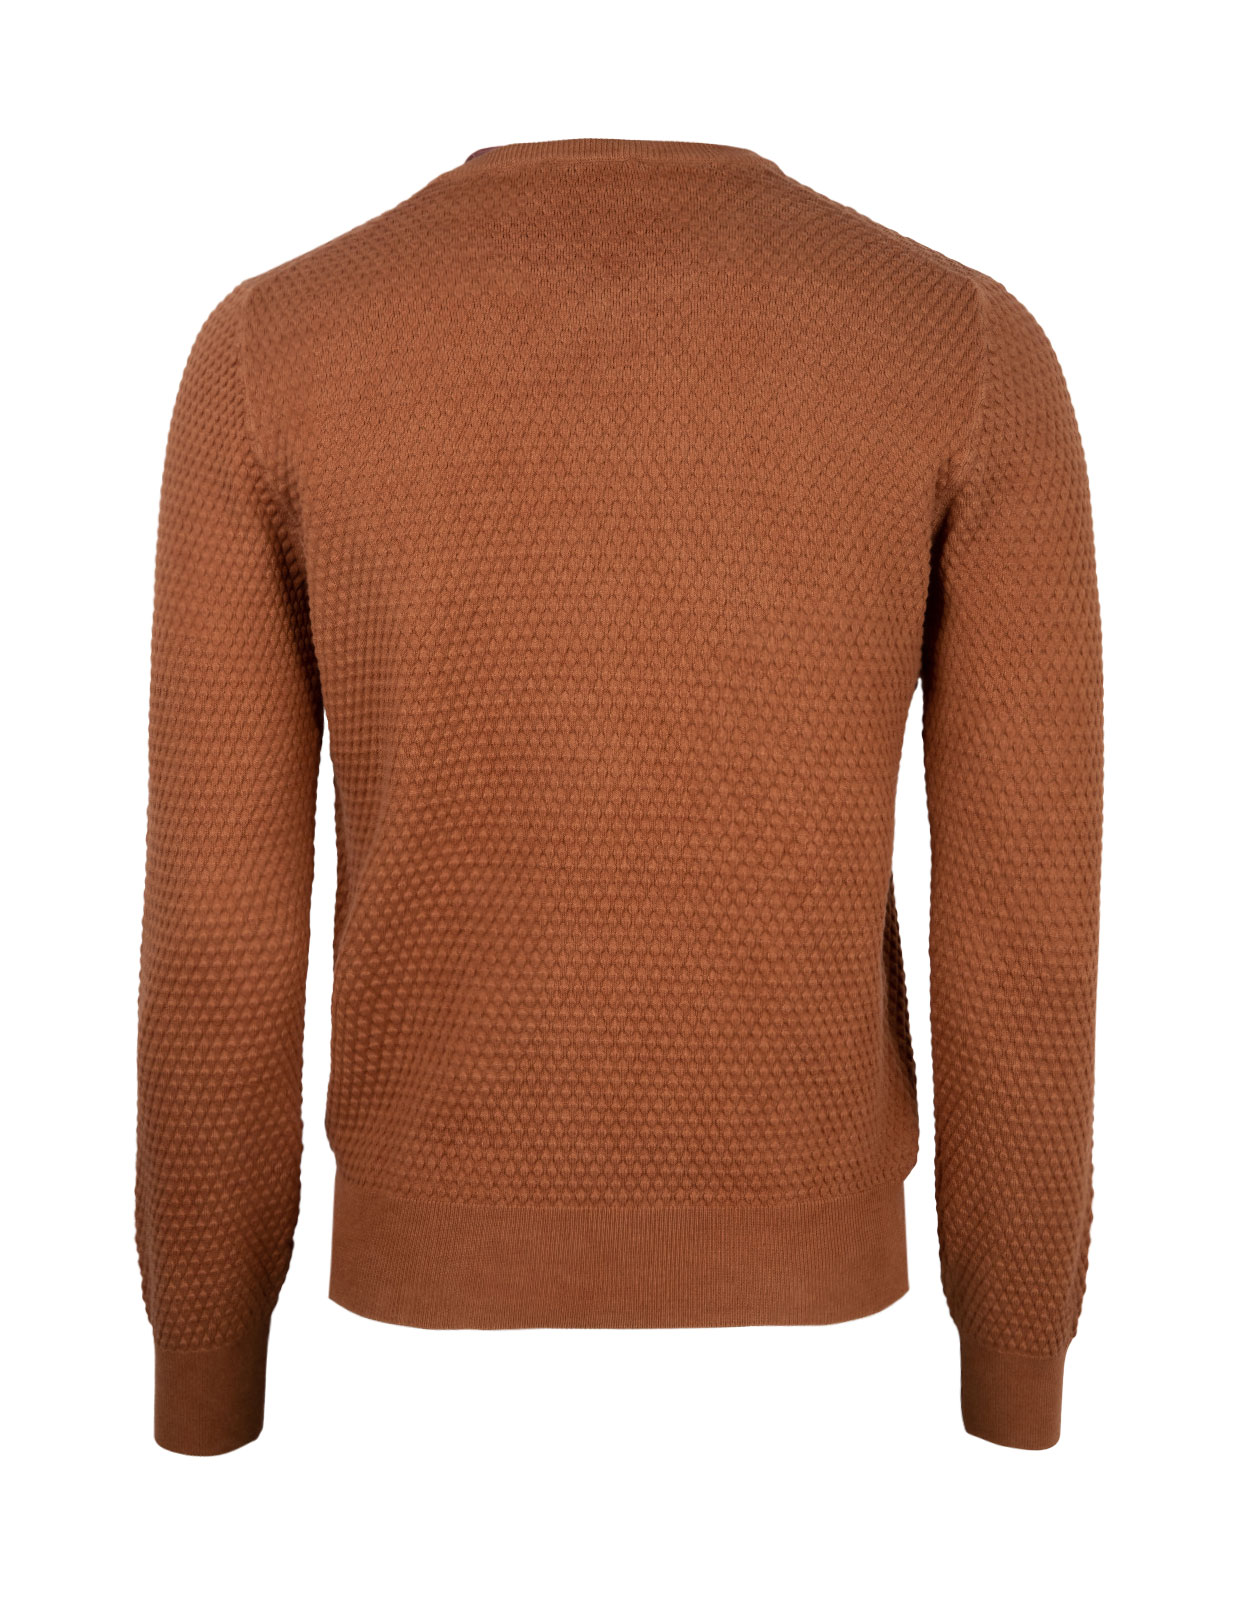 Crew Neck Knitted Texture Cotton Tobacco